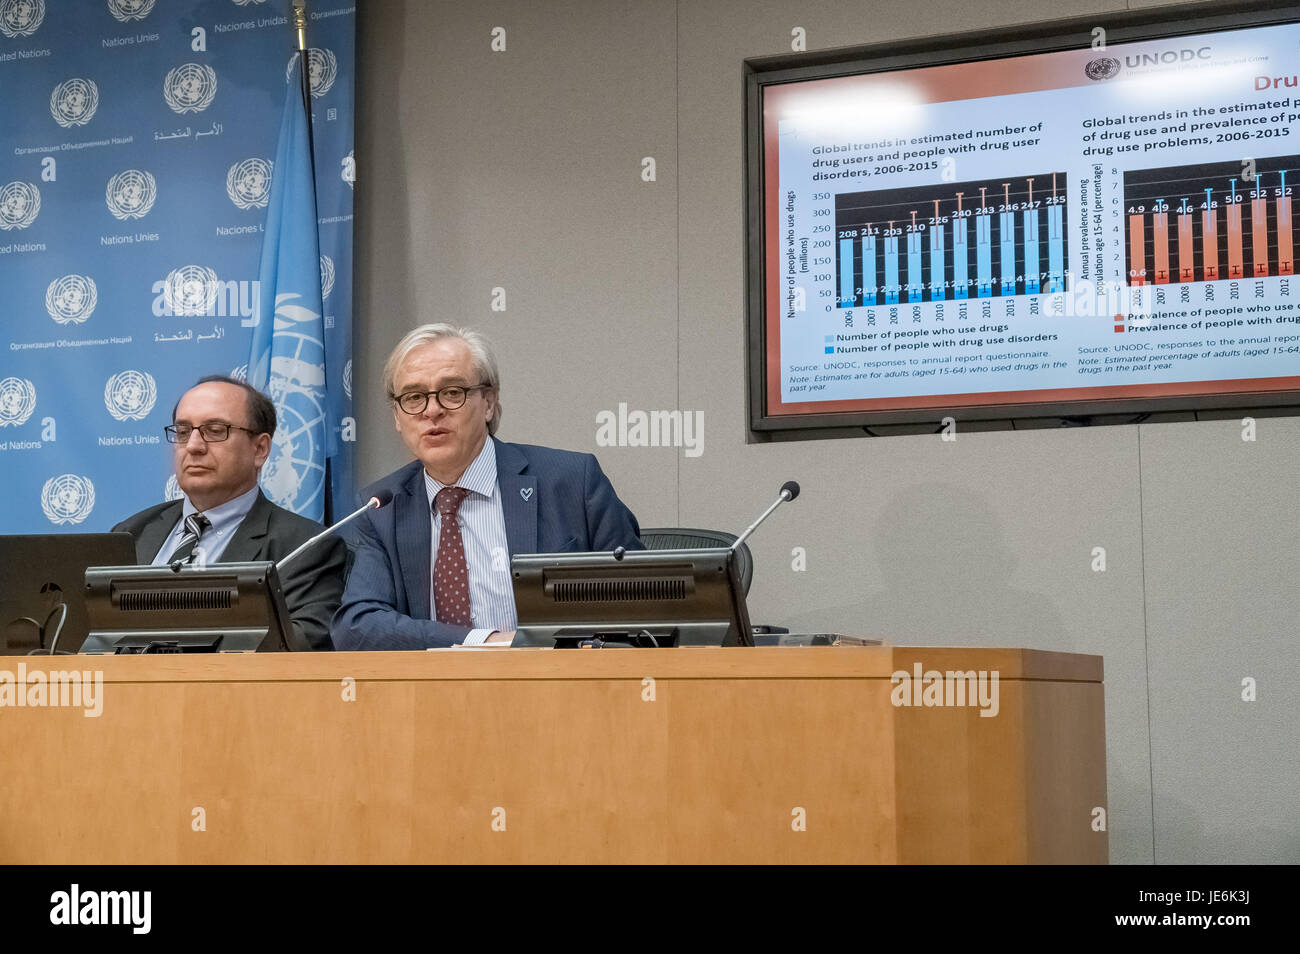 New York, United States. 22nd June, 2017. Thomas Pietschmann (L) and Jean-Luc Lemahieu (R) are seen during the press briefing. On the occasion of the launch of the 2017 World Drug Report, United Nations Office on Drugs and Crime (UNODC) Director for Policy Analysis and Public Affairs Jean-Luc Lemahieu and UNODC Research Officer Dr. Thomas Pietschmann held a press briefing at UN Headquarters to detail key findings in the document. Credit: Albin Lohr-Jones/Pacific Press/Alamy Live News Stock Photo